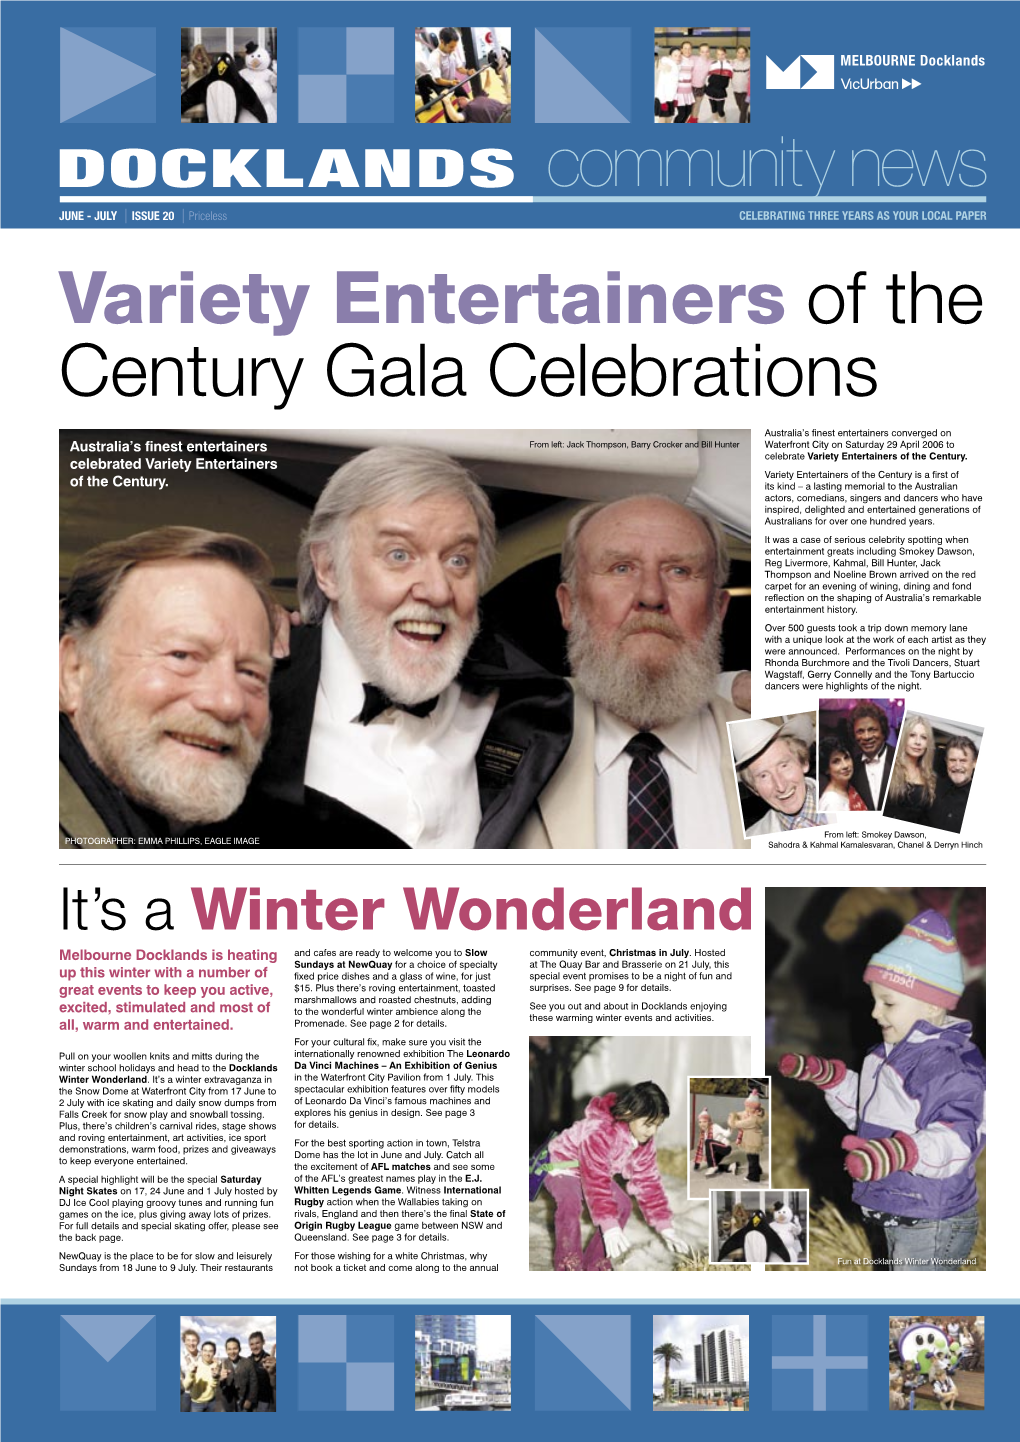 Variety Entertainers of the Century Gala Celebrations